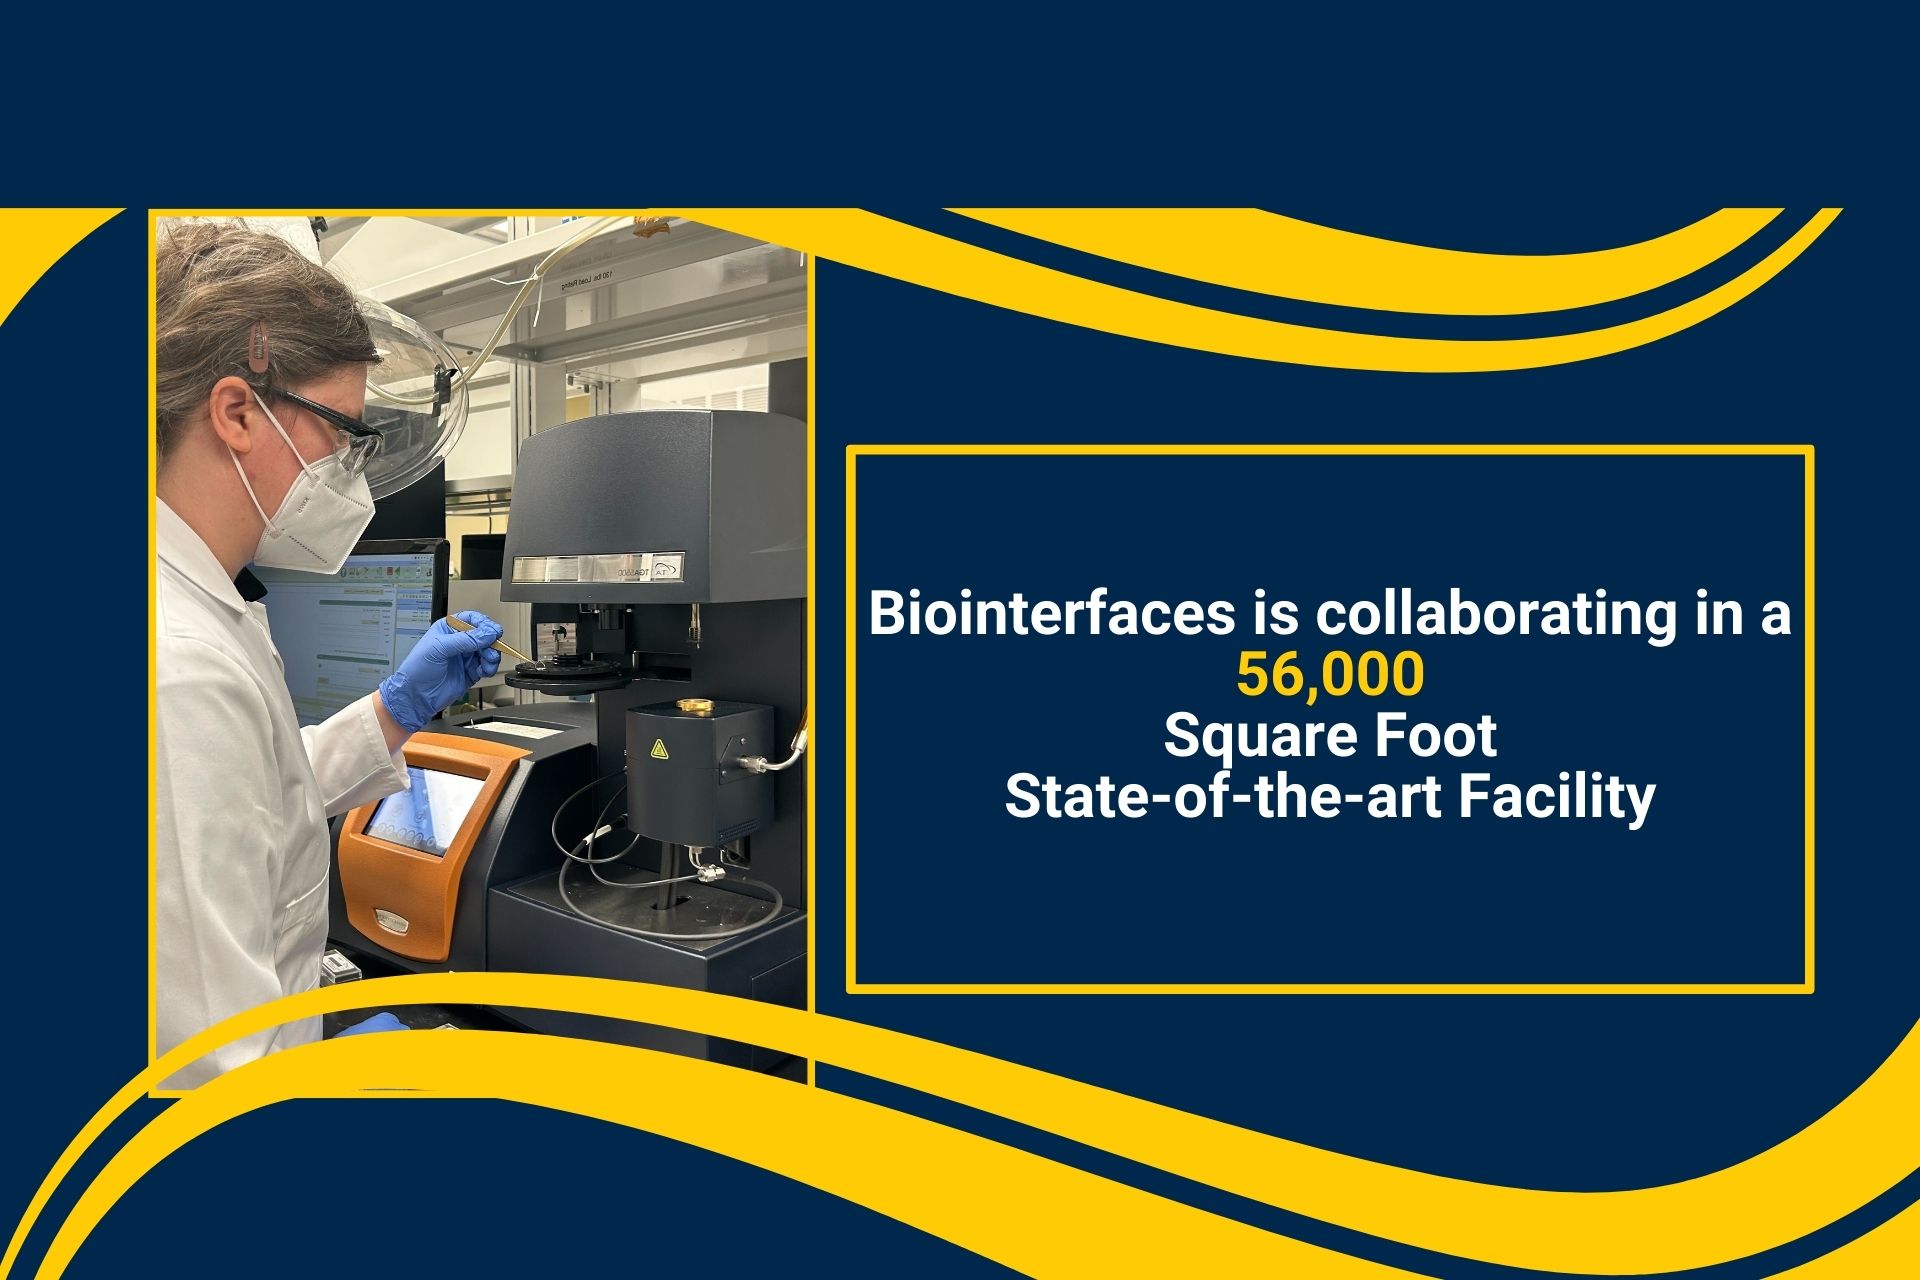 Photo of Dr. Sarah Spanninga in the lab operating equipment. Words: Biointerfaces is collaborating in a 56,000 Square Foot State-of-the-art Facility